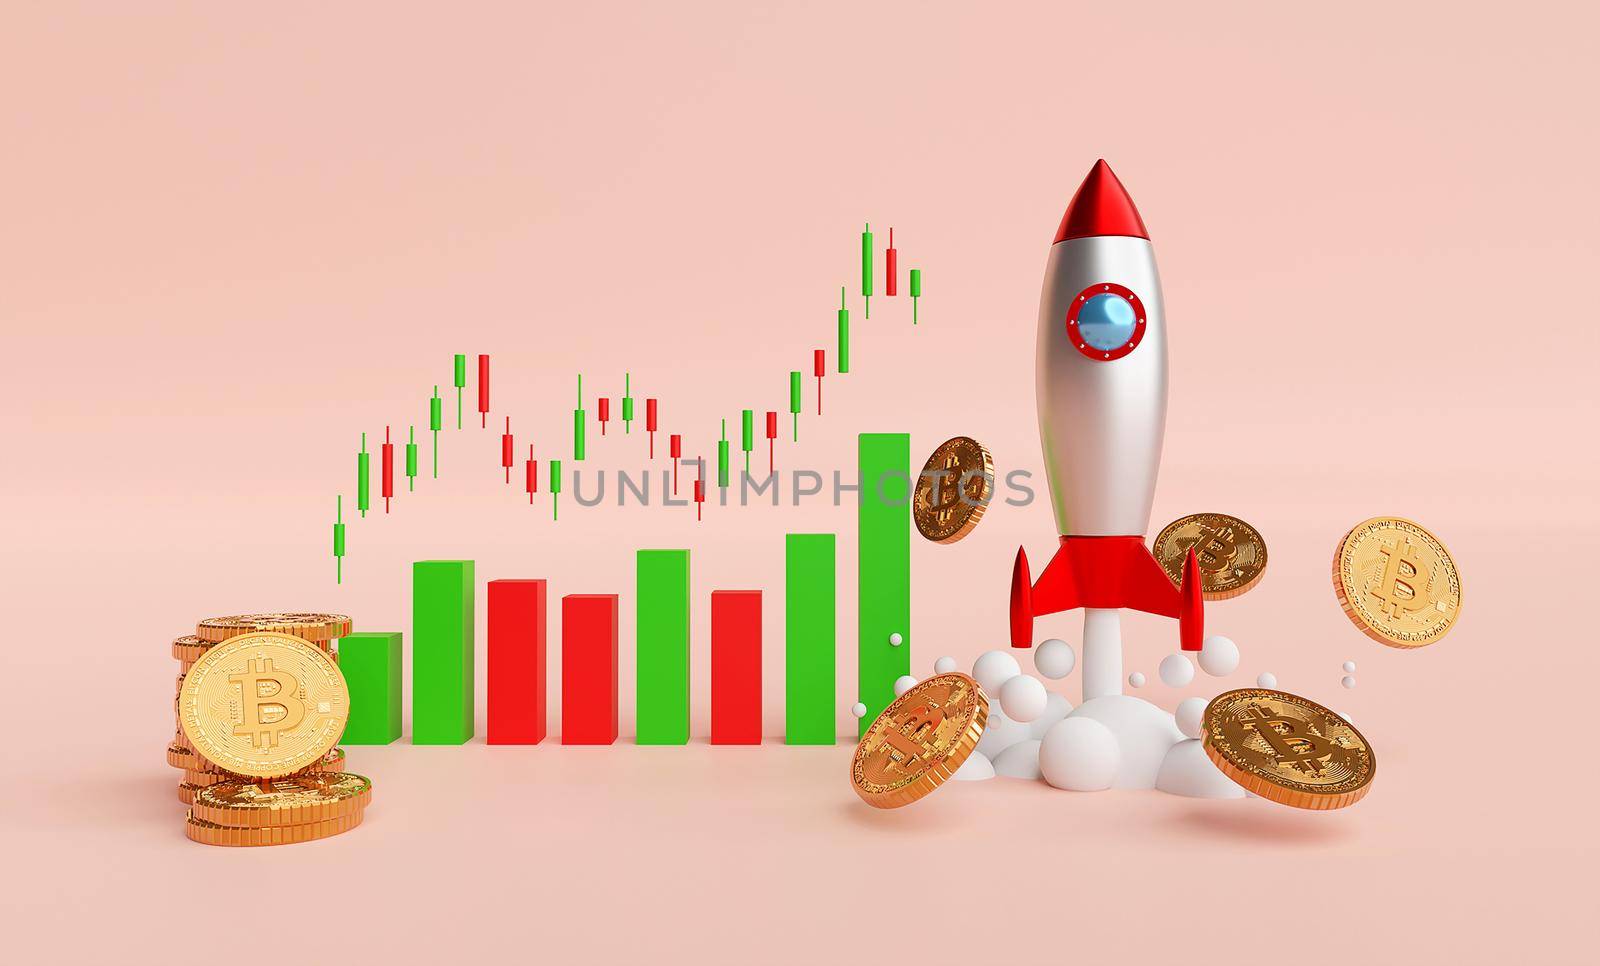 Rocket launching and BTC bitcoin with candle graph chart, 3d illustration